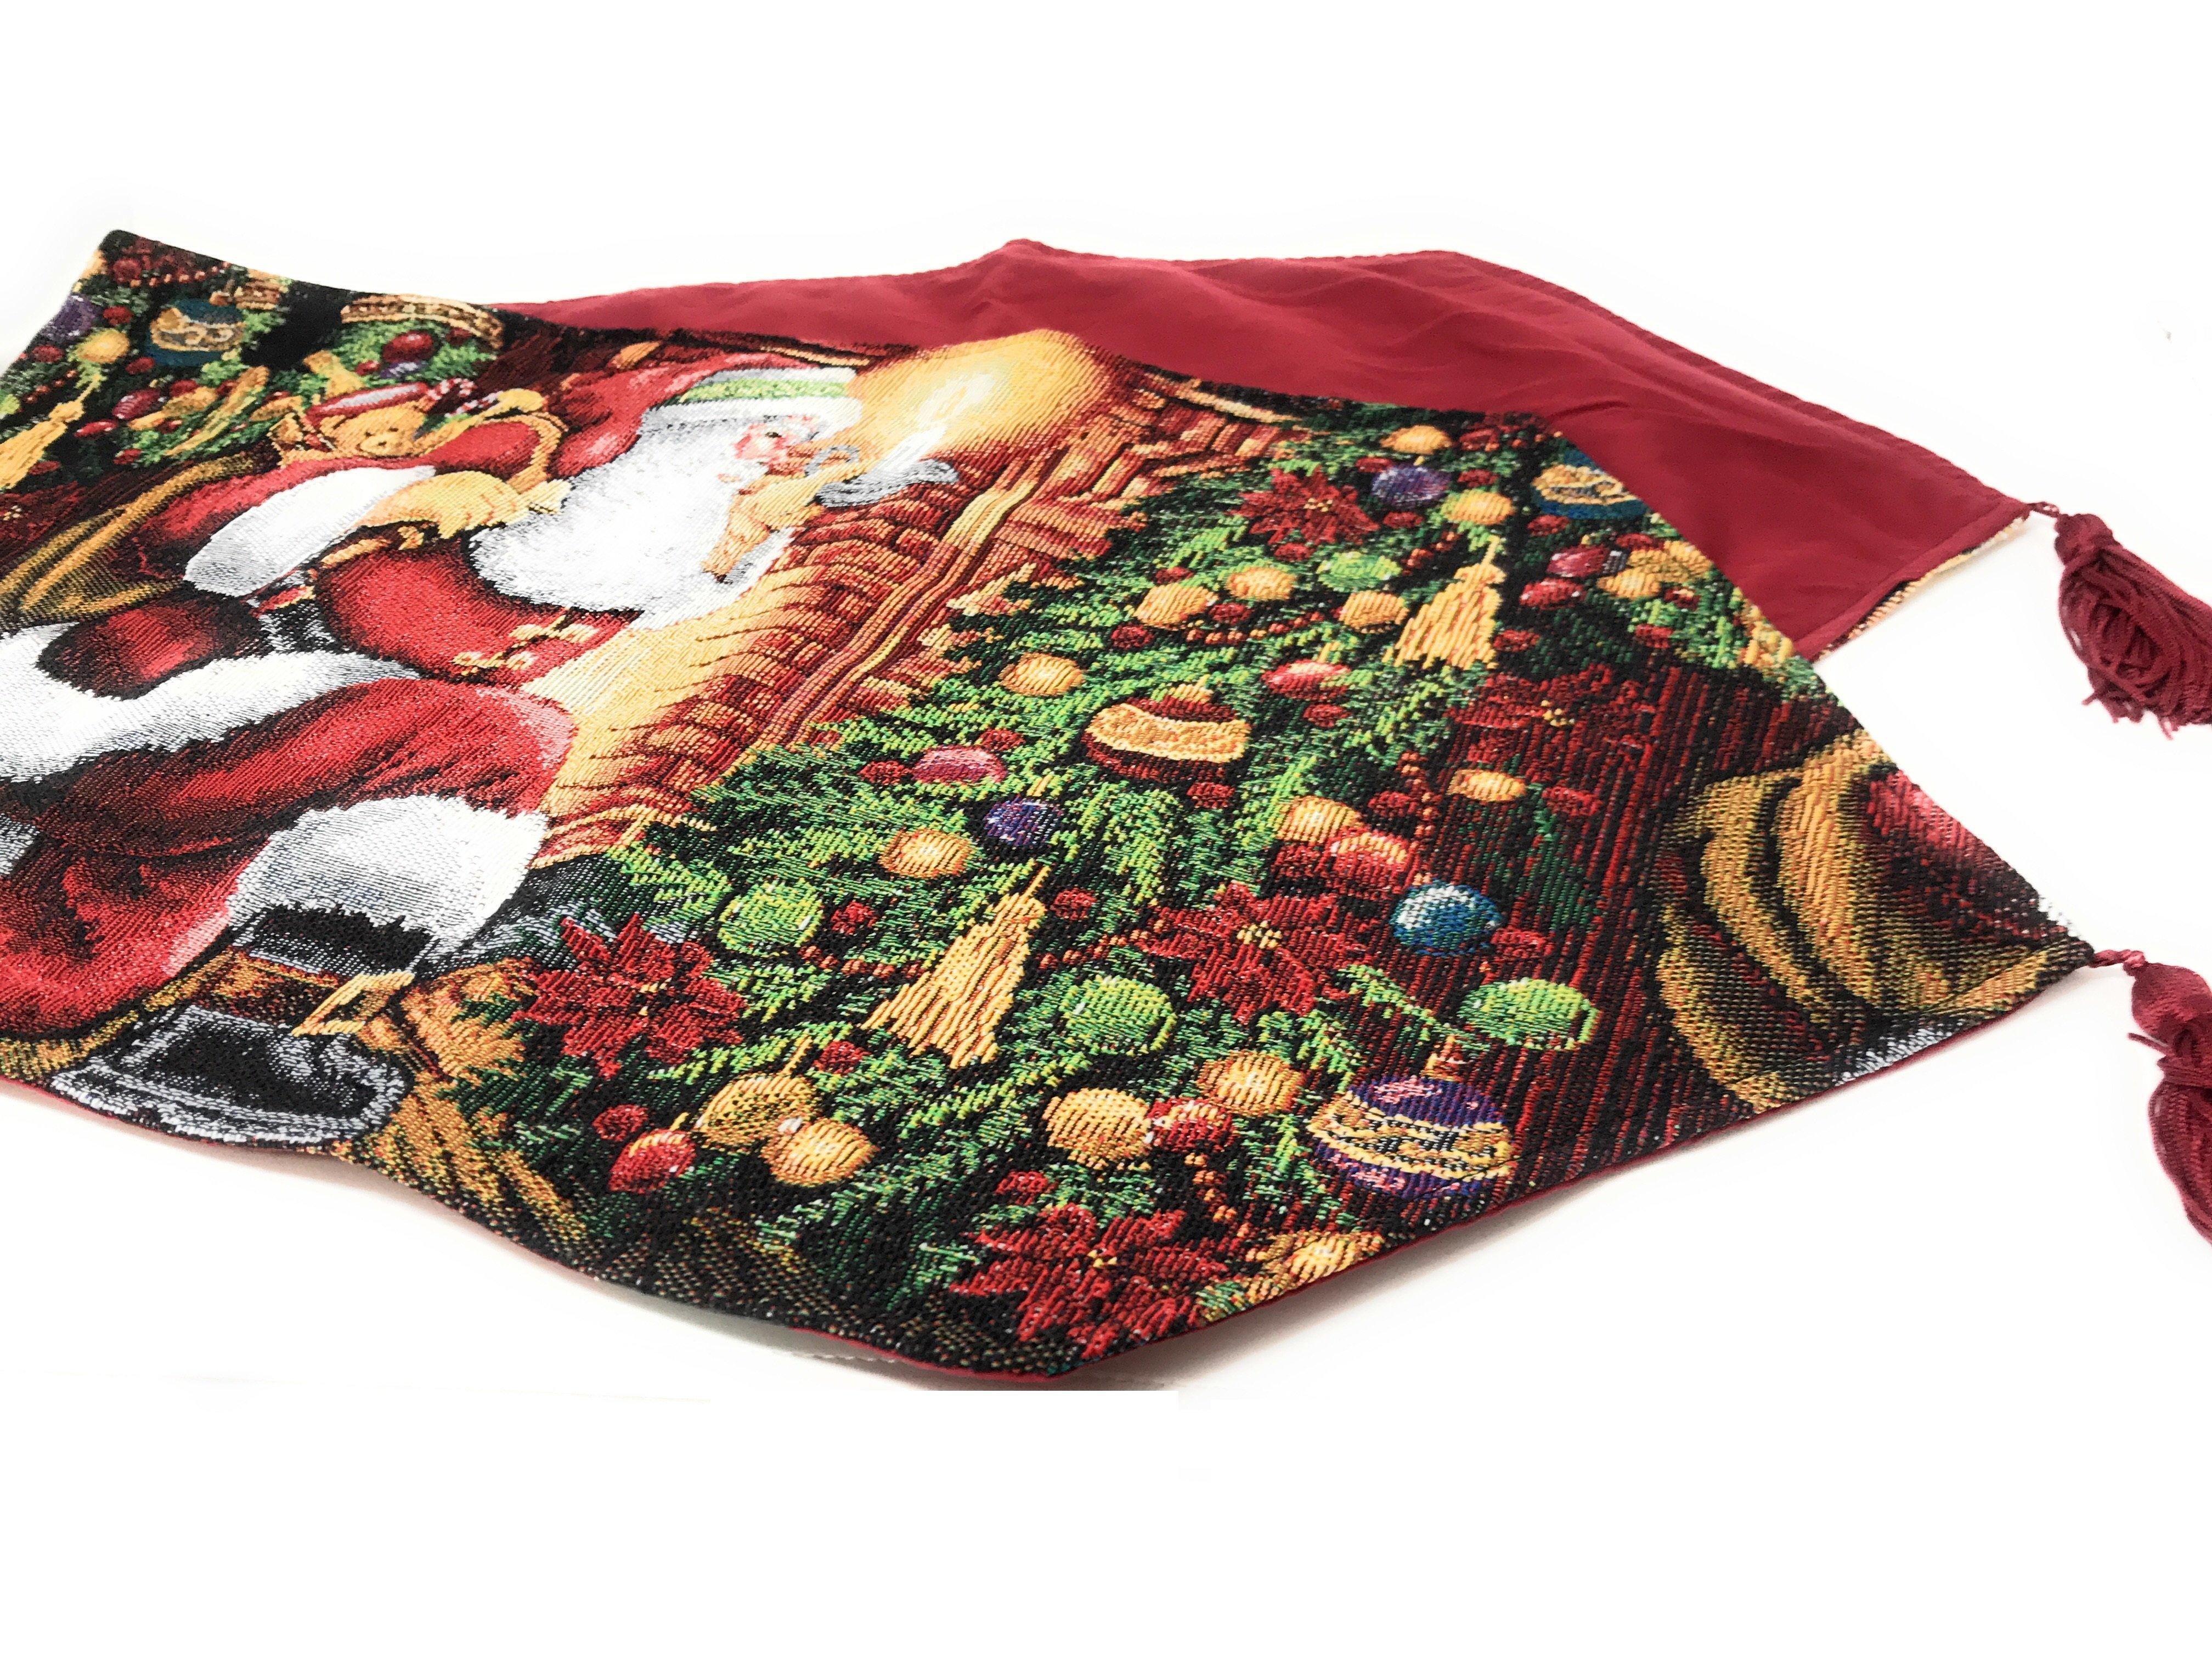 Tache Festive Down the Chimney Woven Tapestry Table Runners (DB11533) - Tache Home Fashion